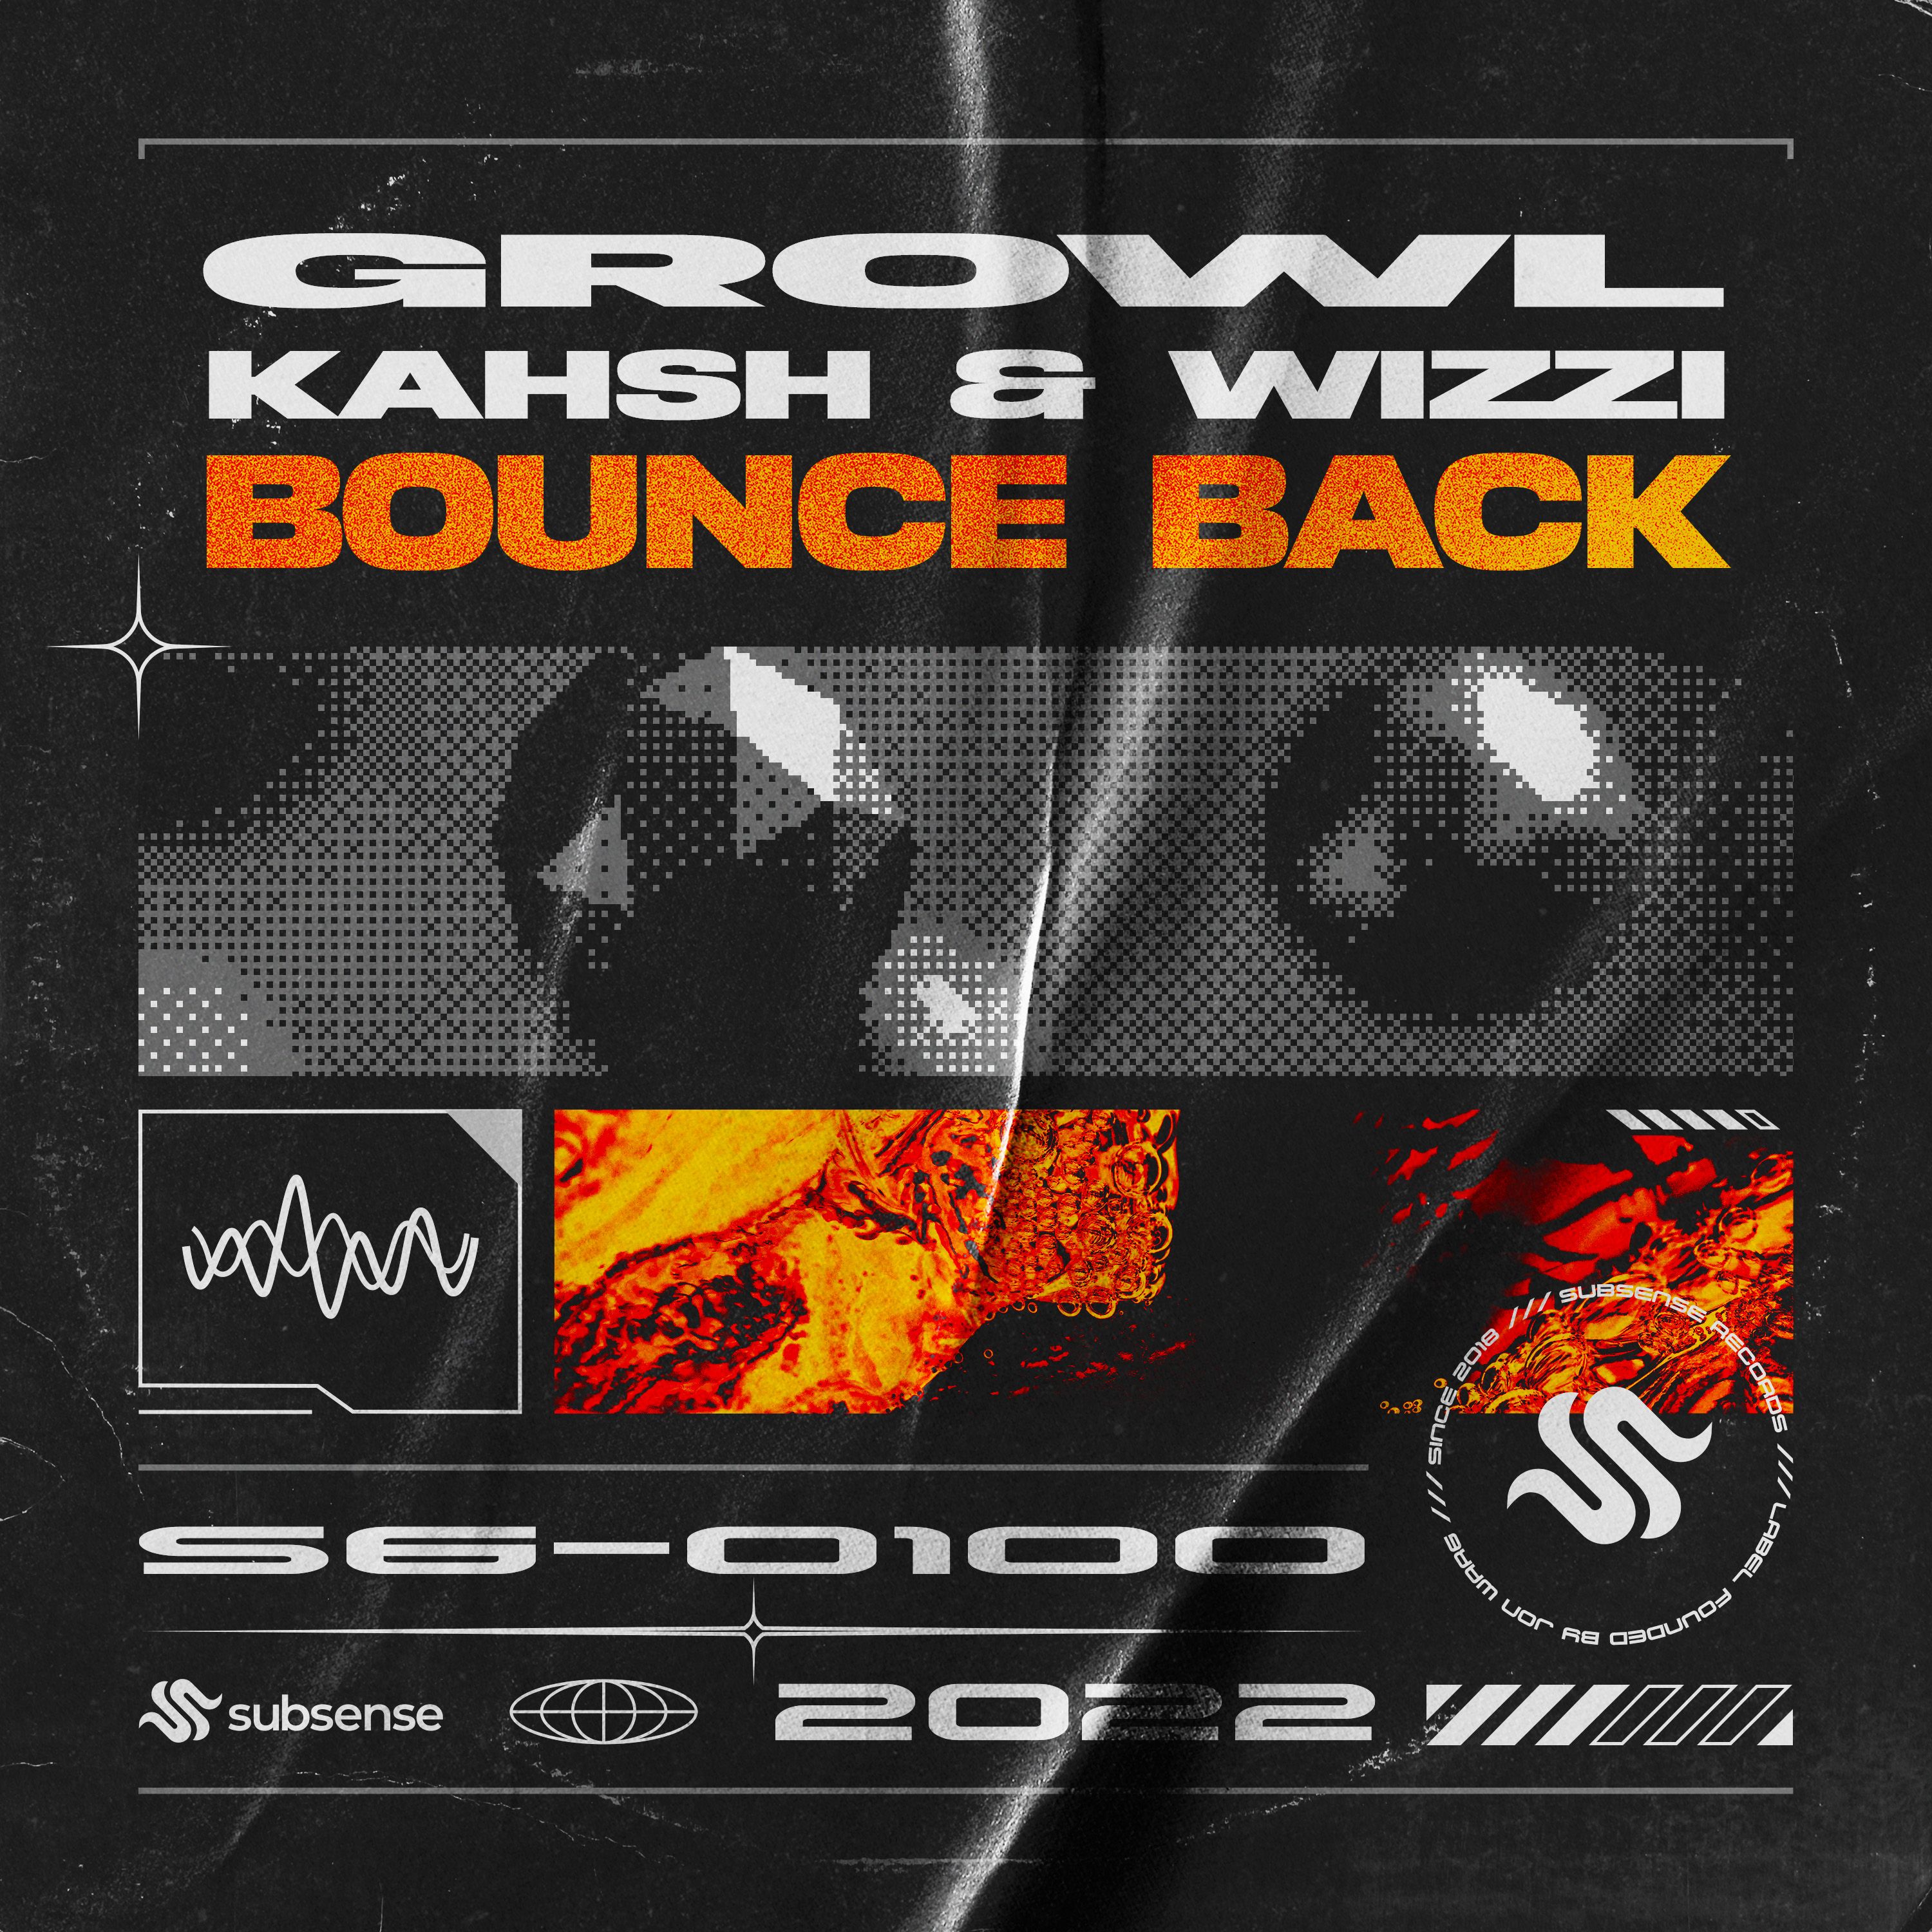 Ladda ner GROWL, KAHSH & Wizzi - Bounce Back (Extended Mix)